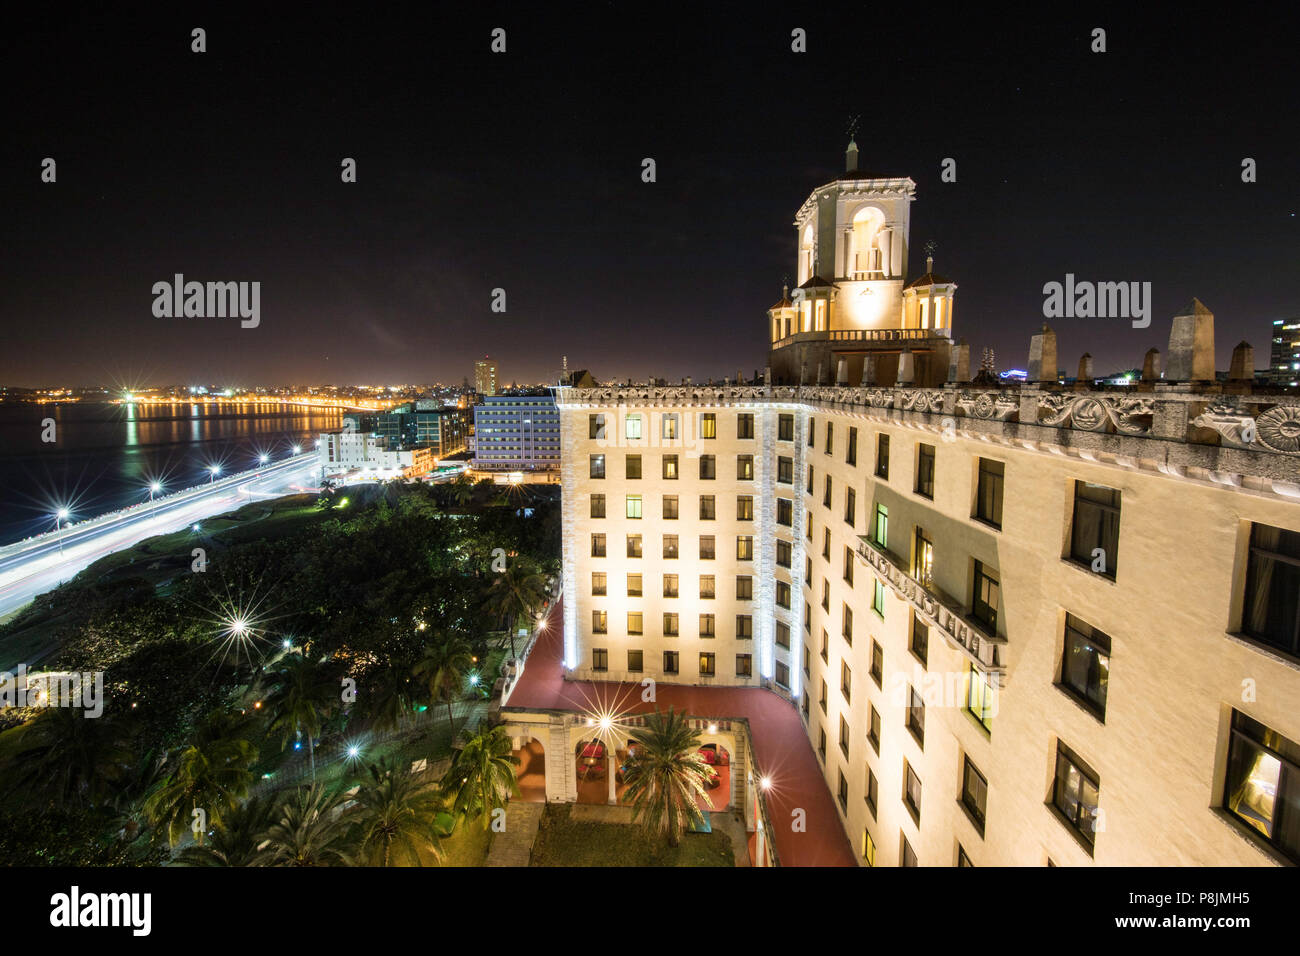 The historic Hotel Nacional de Cuba at night, located on the MalecÃ³n in the middle of Vedado, Cuba Stock Photo